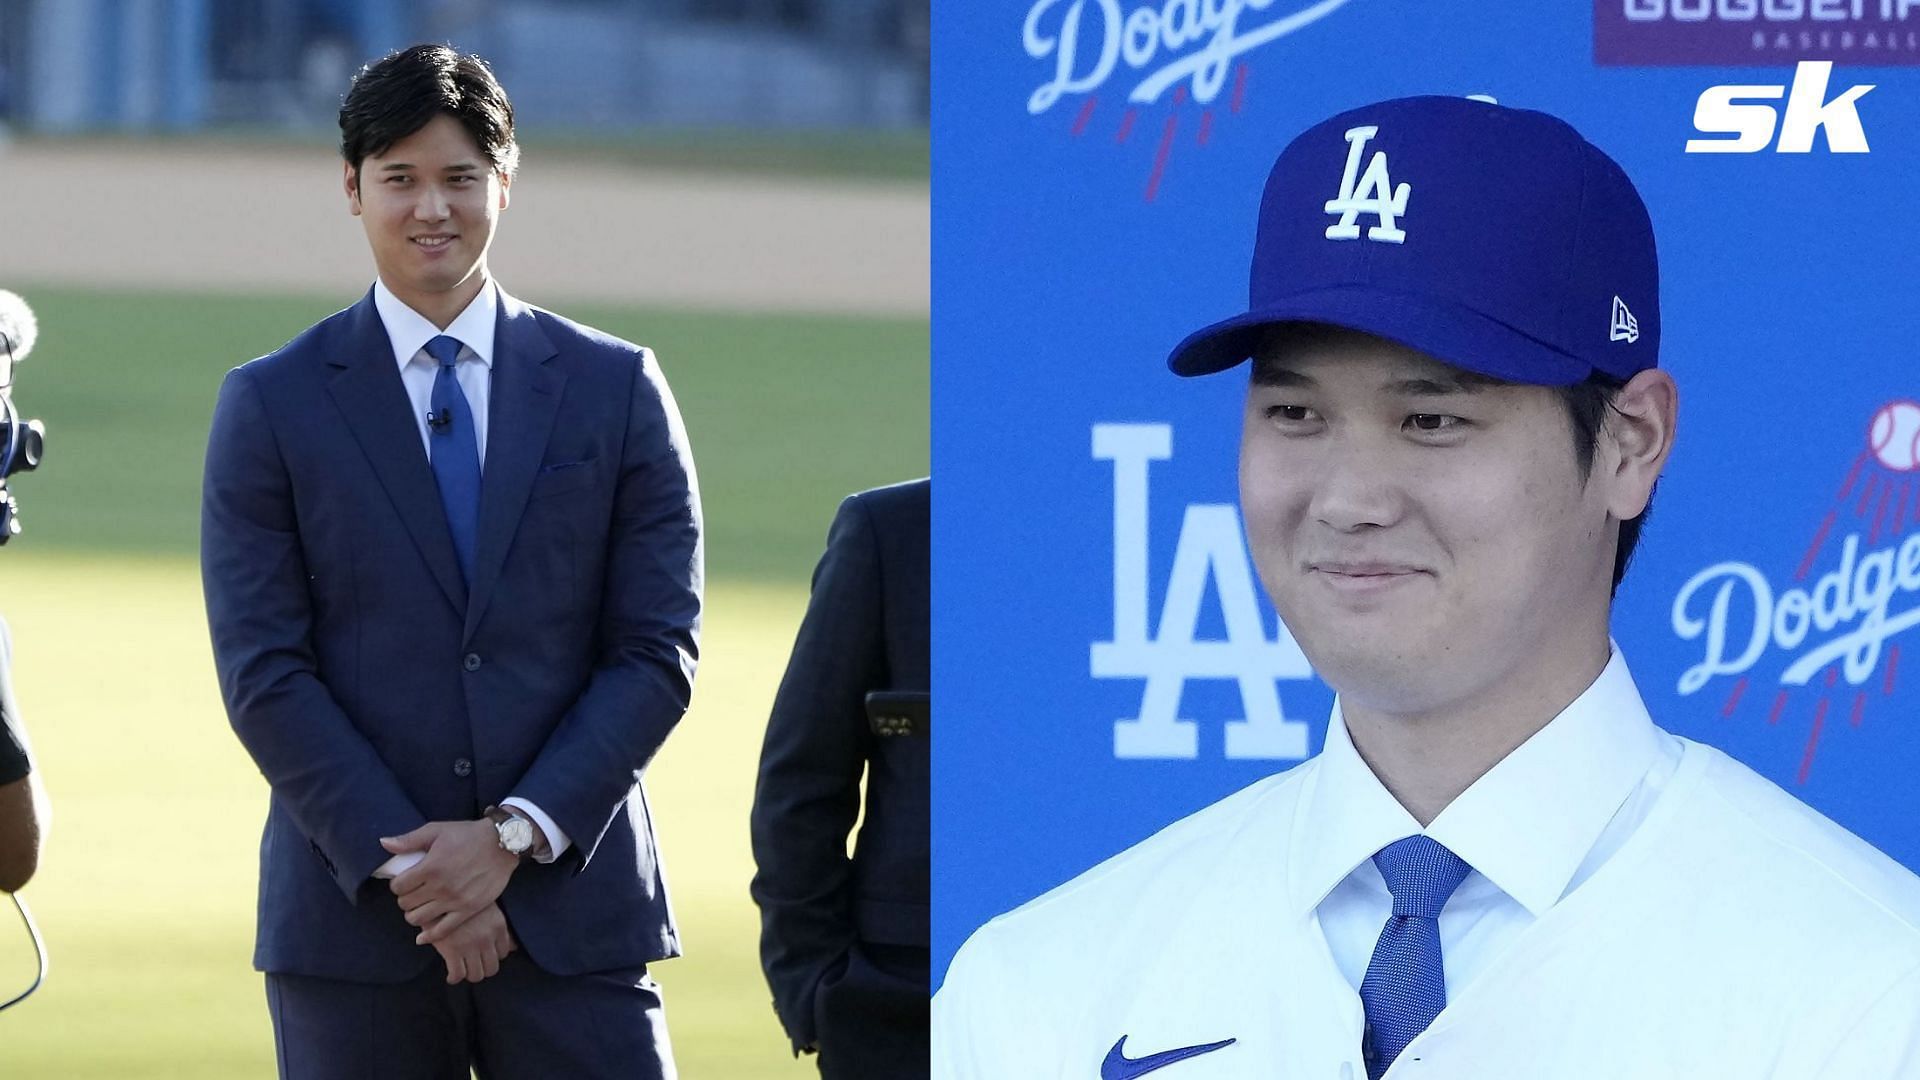 Shohei Ohtani revealed that he had made his decision to join the Dodgers the night before announcing the deal